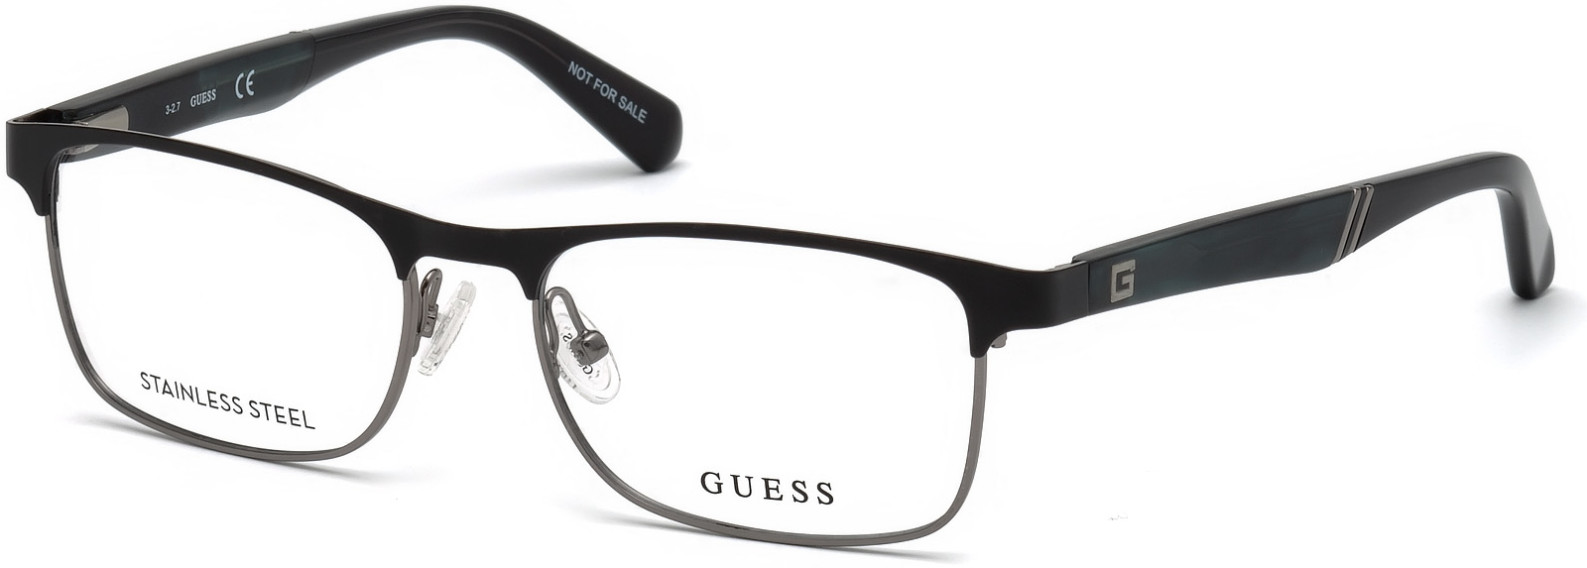 GUESS 1952 001